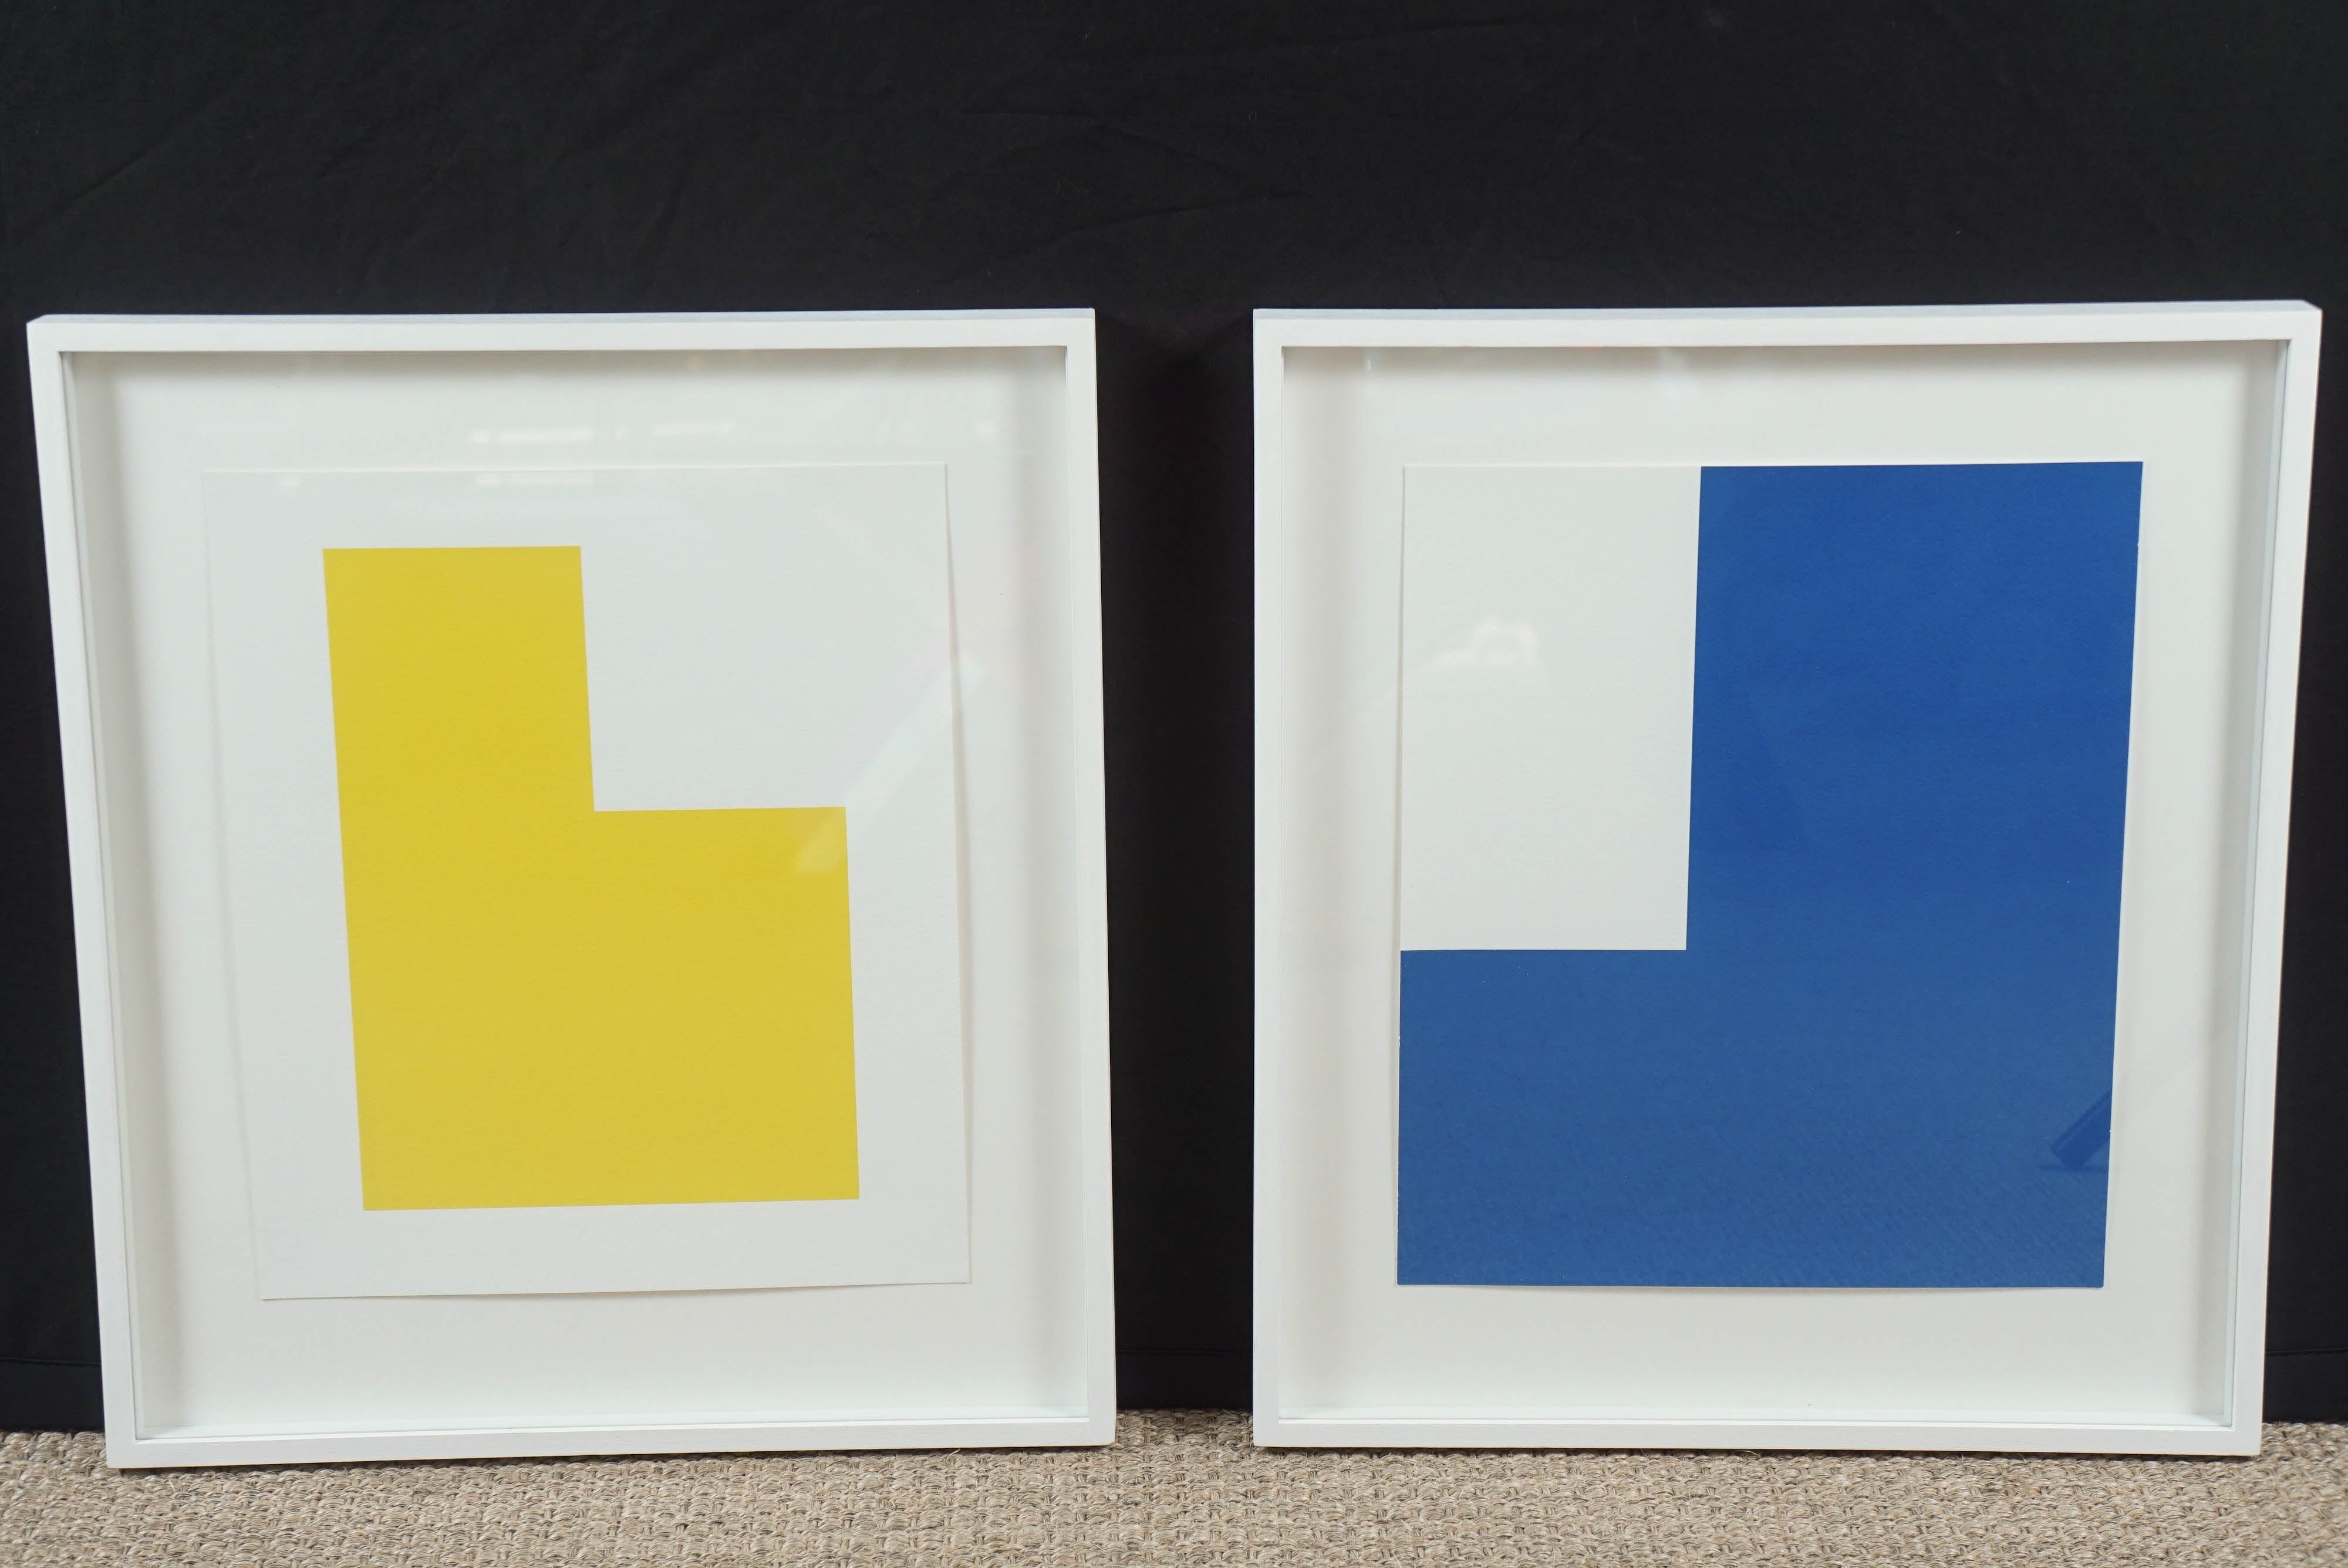 Here is a pair of graphic serigraphs by Aurelie Nemours ( 1910 - 2005 ).
Titles: Angle Droit JV and Angle Droit BL 
Dated:1996. Signed ad numbered on reverse 90/99
Image size: 12.75 x 10.75 inches. Framed: 17.5 x 15.25